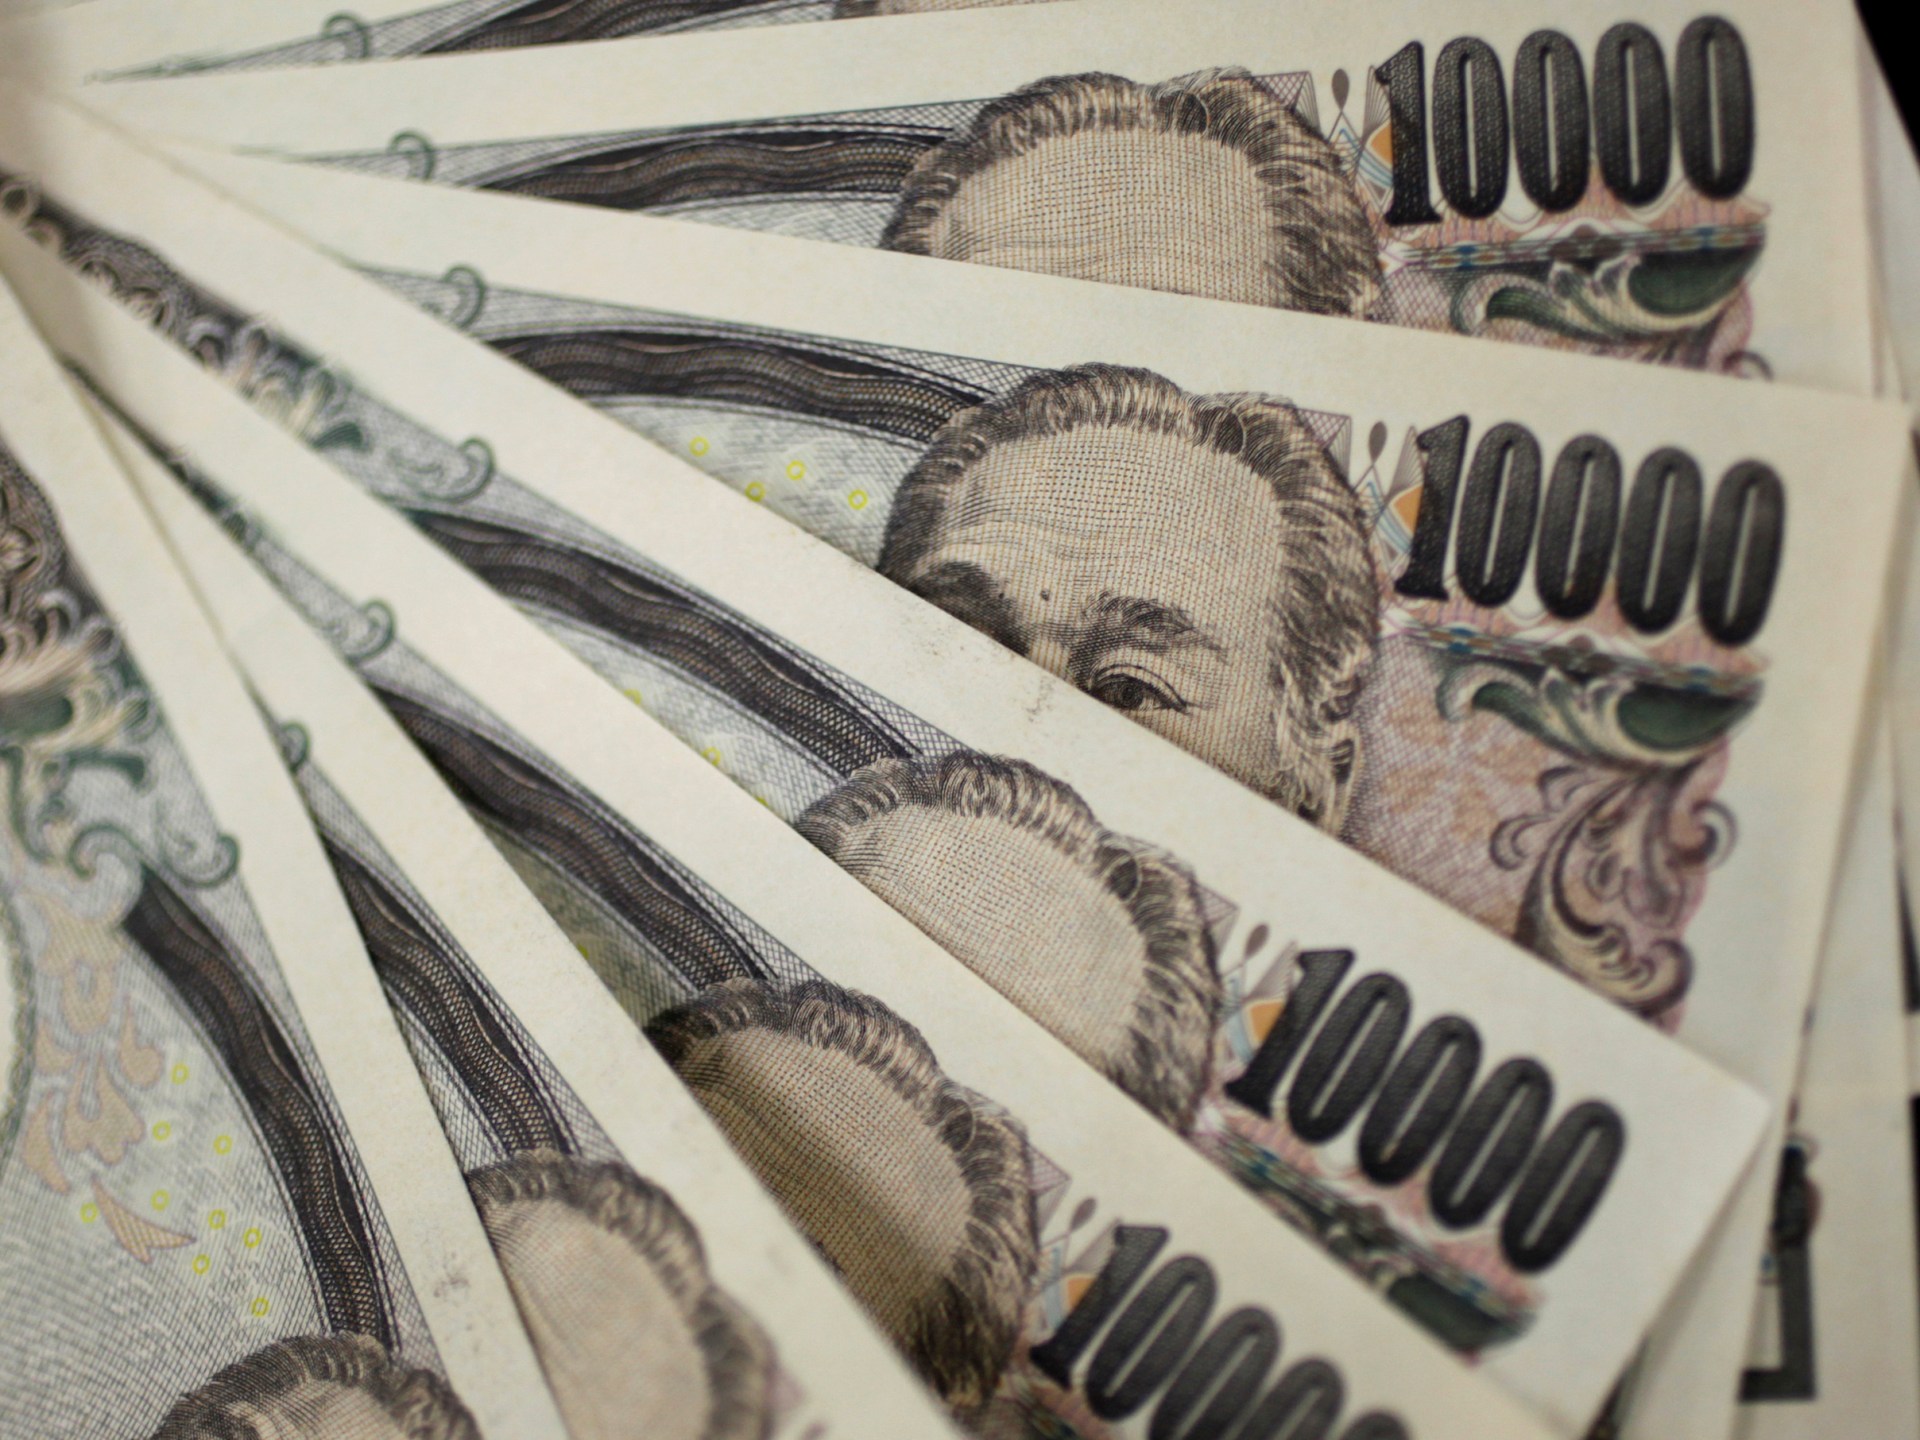 Japan’s yen plunges to lowest level against the dollar since 1990